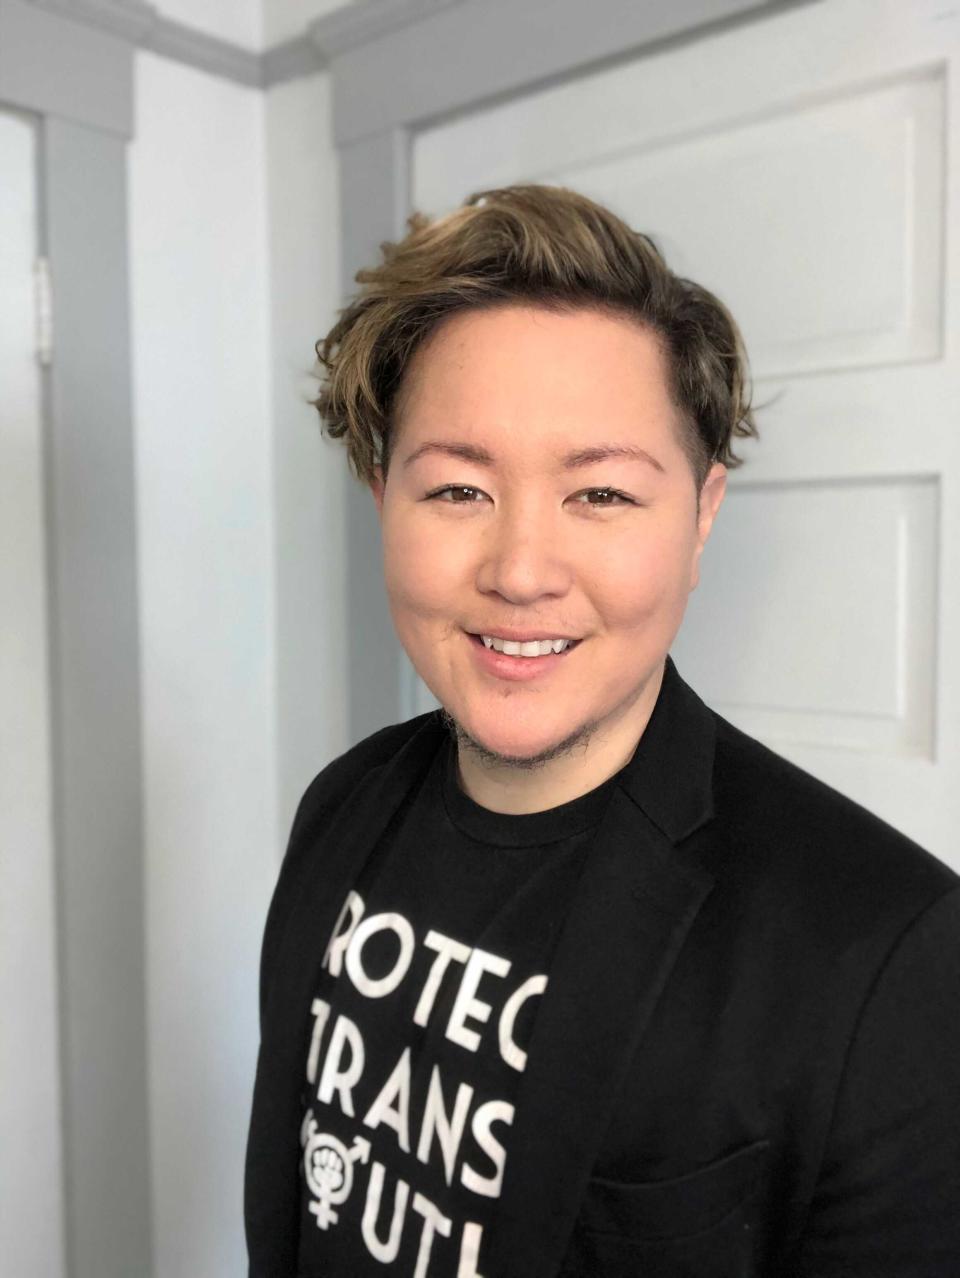 a.t. furuya, who works with LGBTQ youth as a senior yout program manager in GLSEN, said anti-trans policies in other parts of the country can lead to fears even in more accepting places such as California.